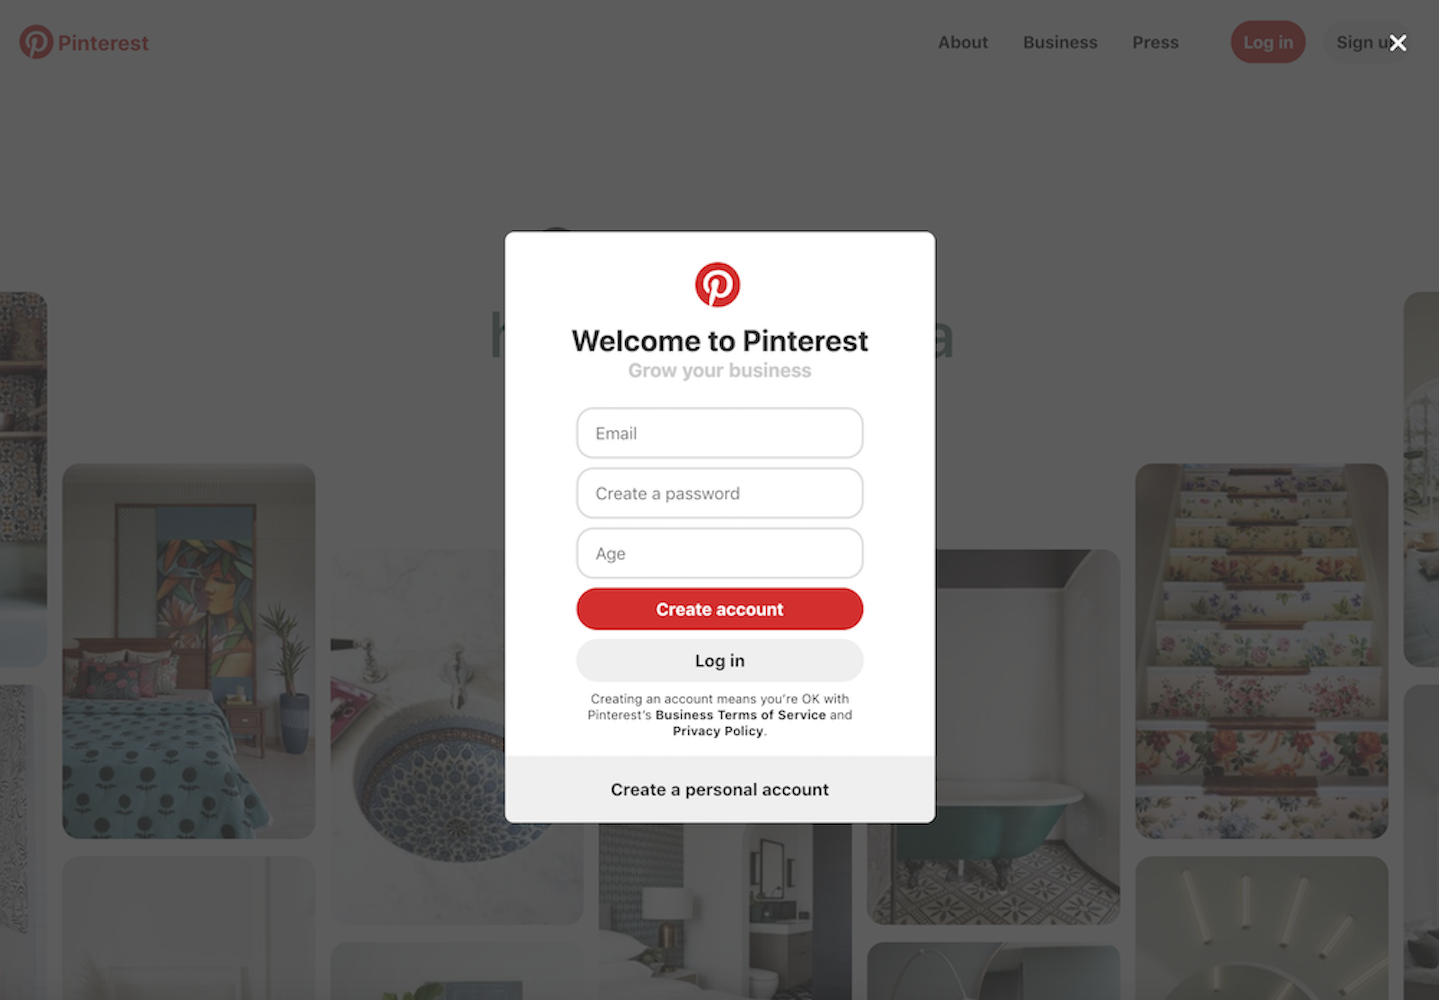 Pinterest Marketing Tips Small Businesses How to Use Pinterest for Your Business